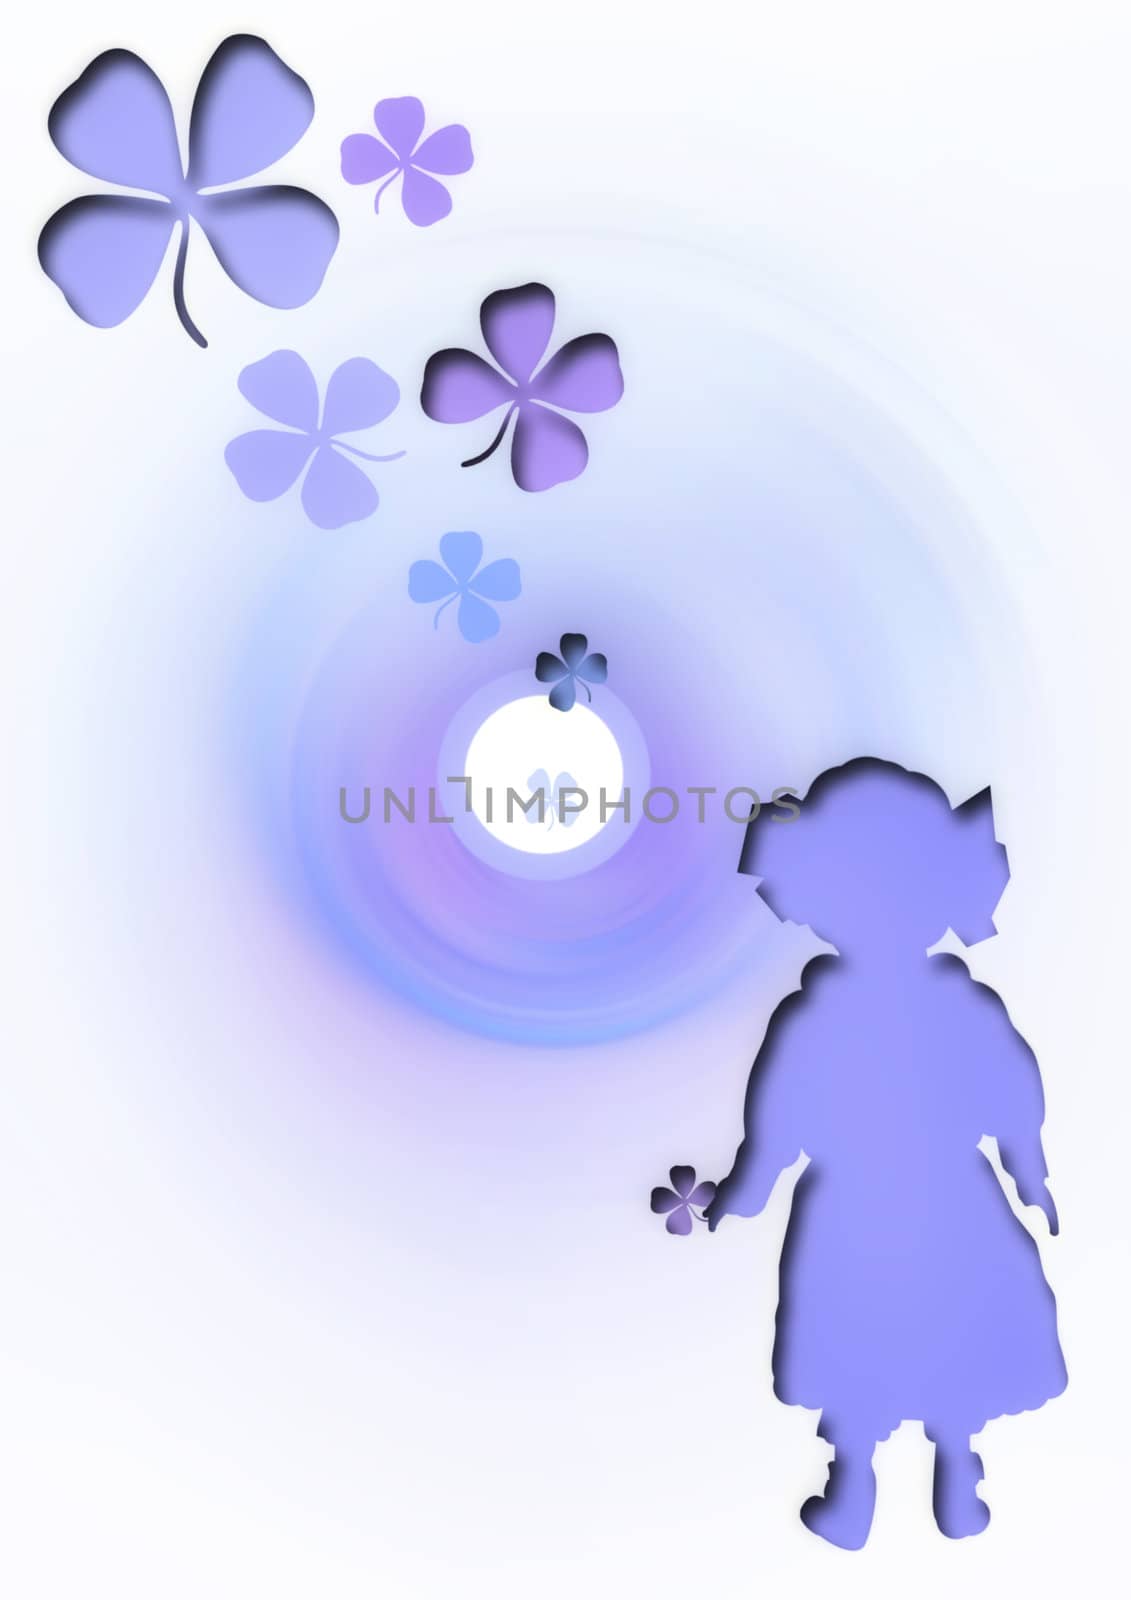 abstract creative symbolic image girl who dreams of a fairy tale